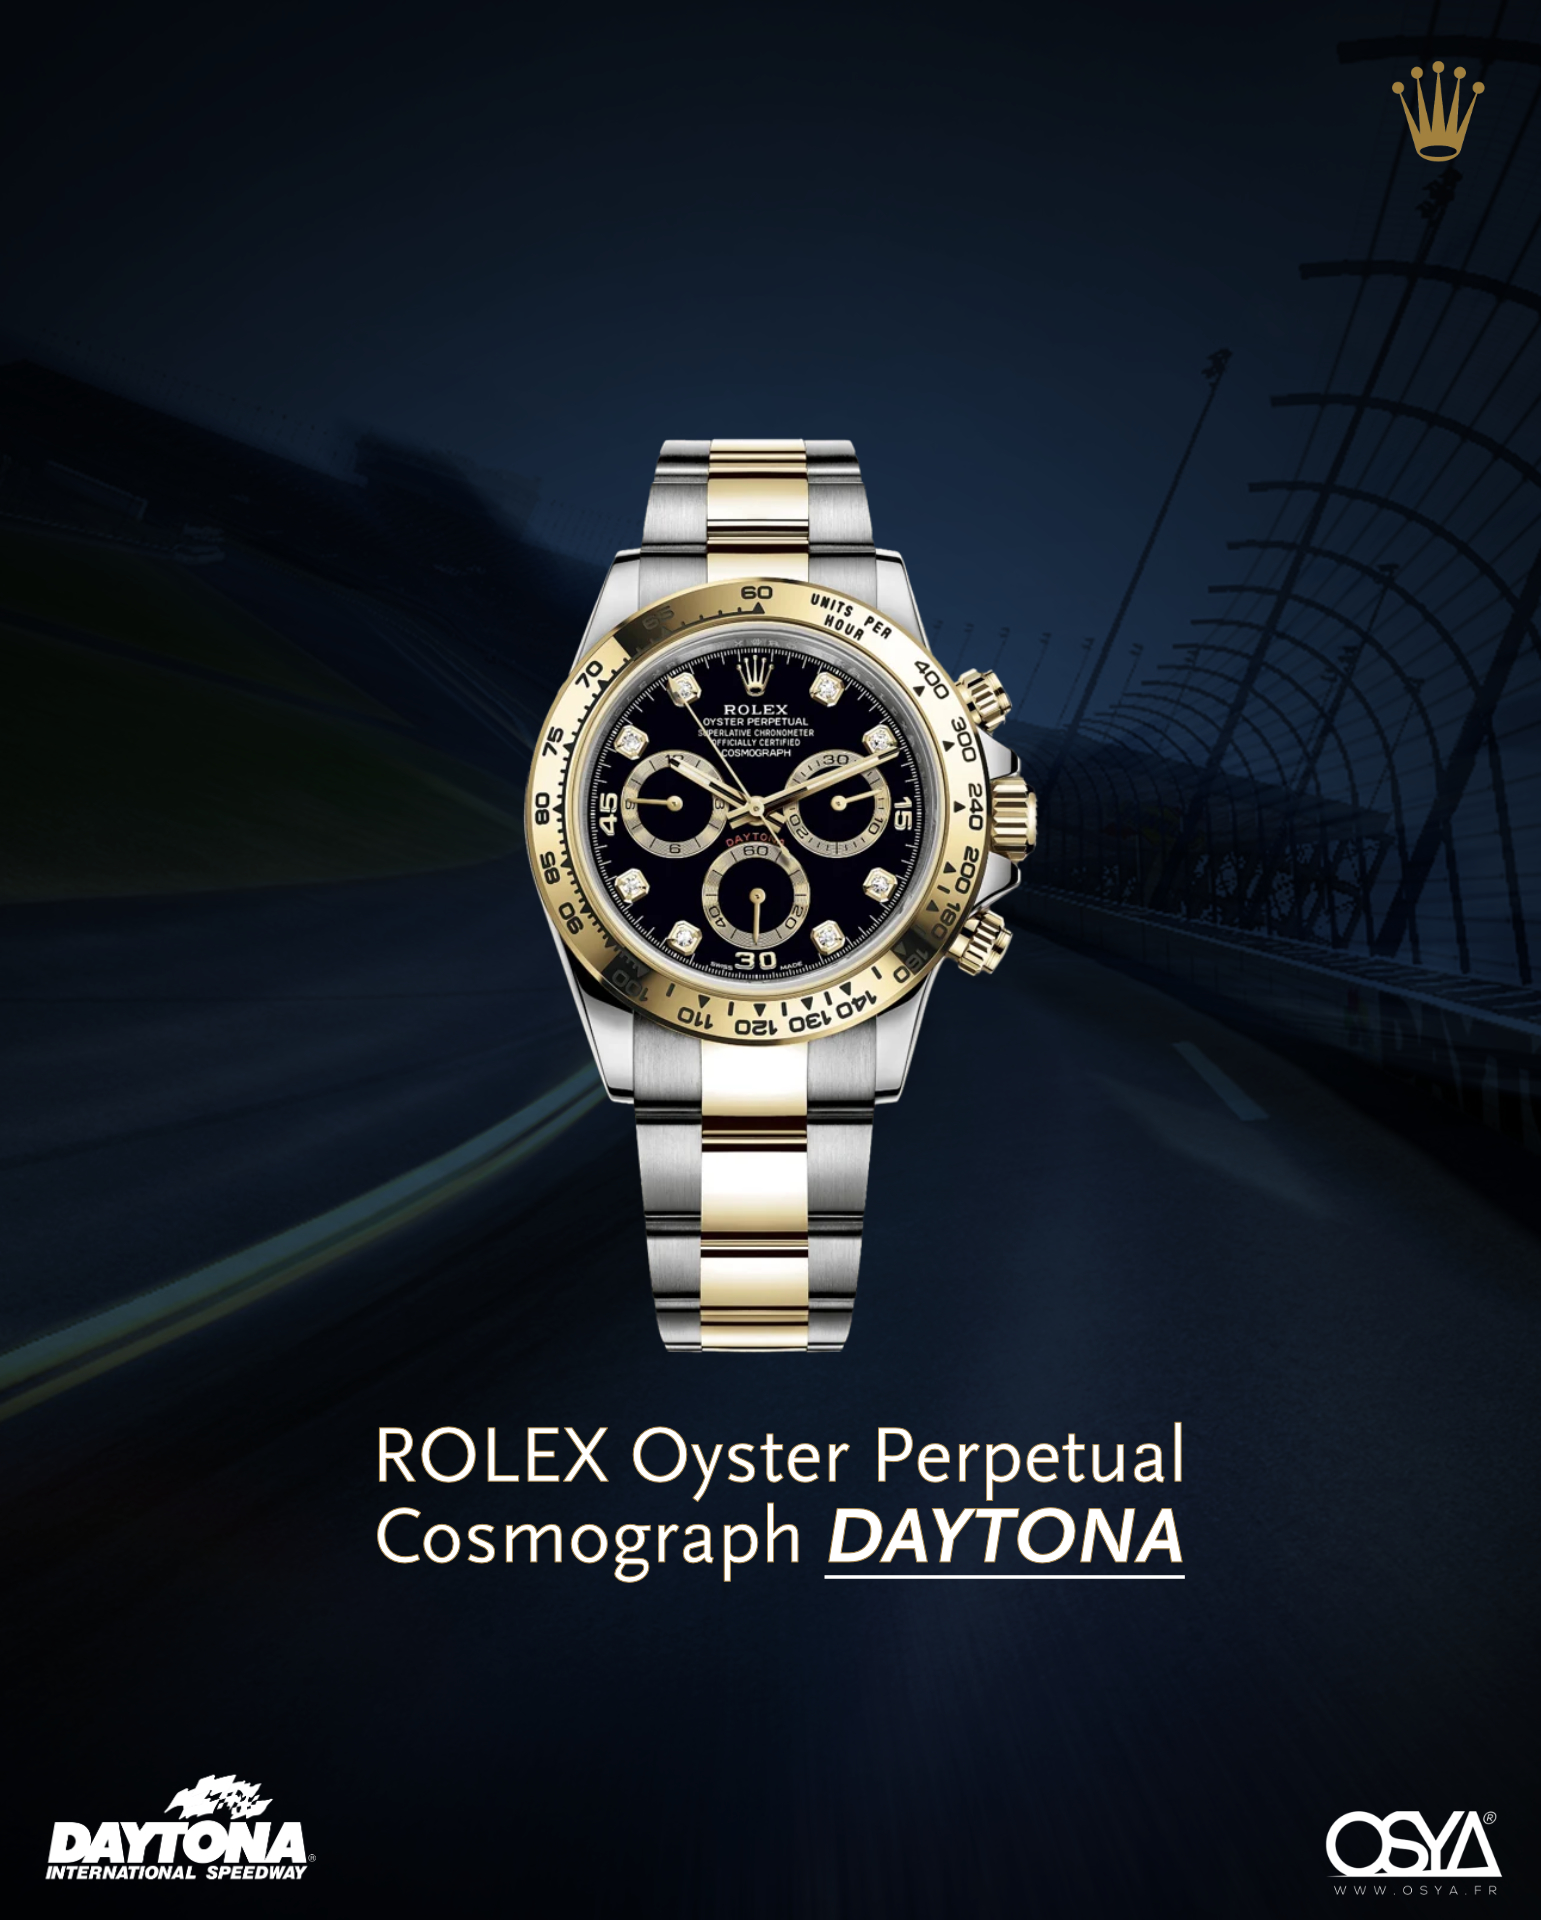 ROLEX Oyster Perpetual Cosmograph